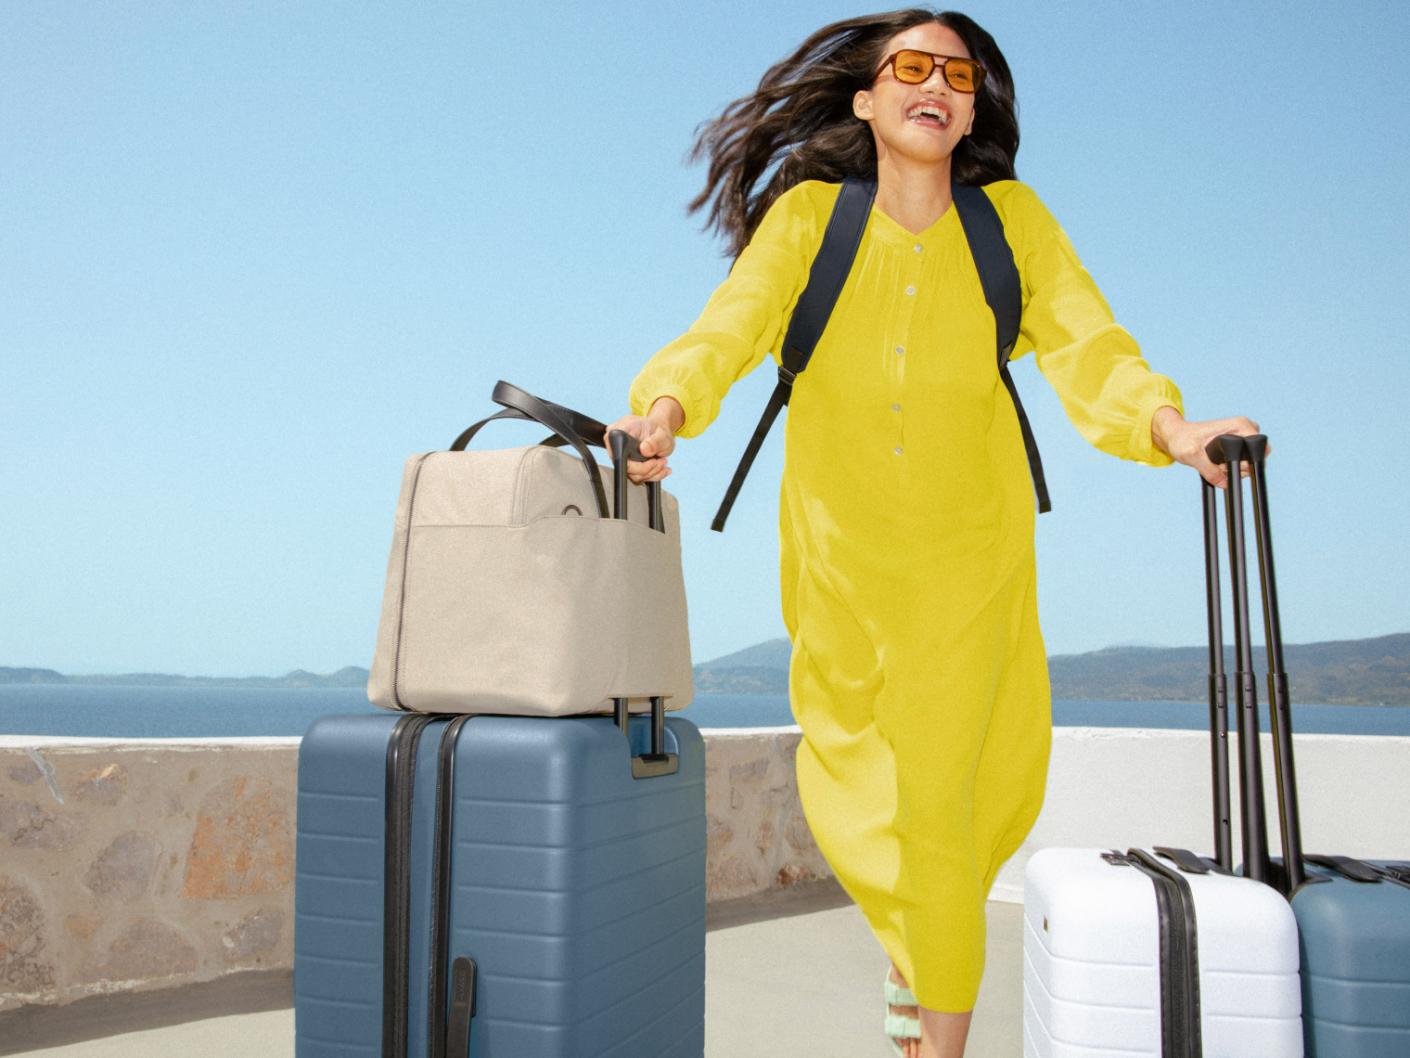 A woman in a yellow dress carrying several Away luggage pieces, including a Large Flex suitcase, an Everywhere Bag, and two carry on suitcases in white and coast